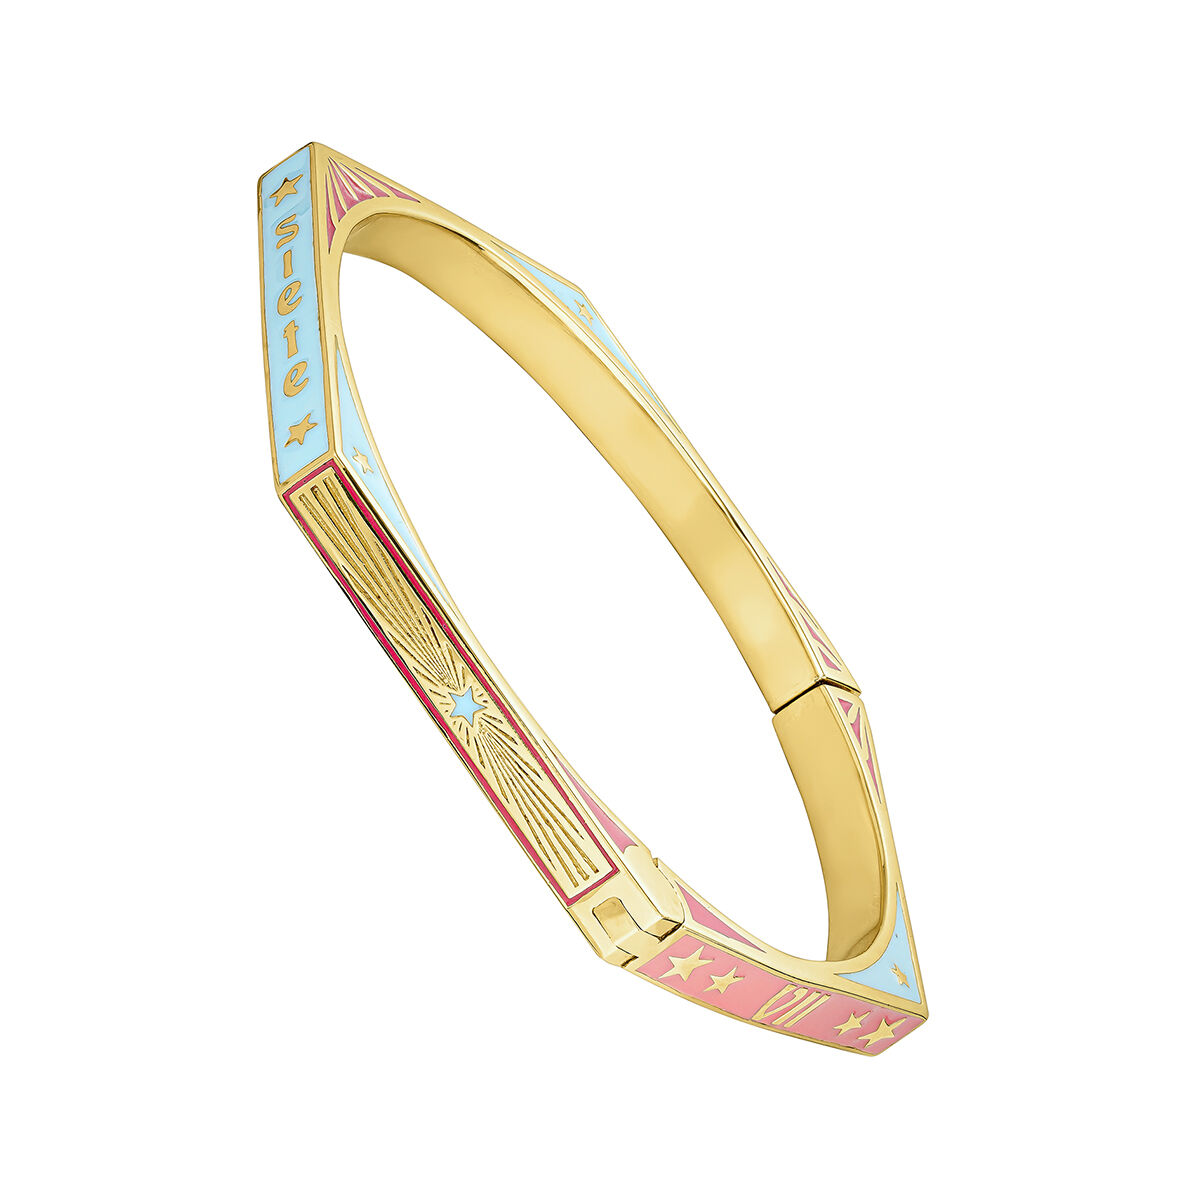 18k gold-plated silver hexagonal rigid bracelet with colors and a number 7, J05088-02-MULENA, hi-res